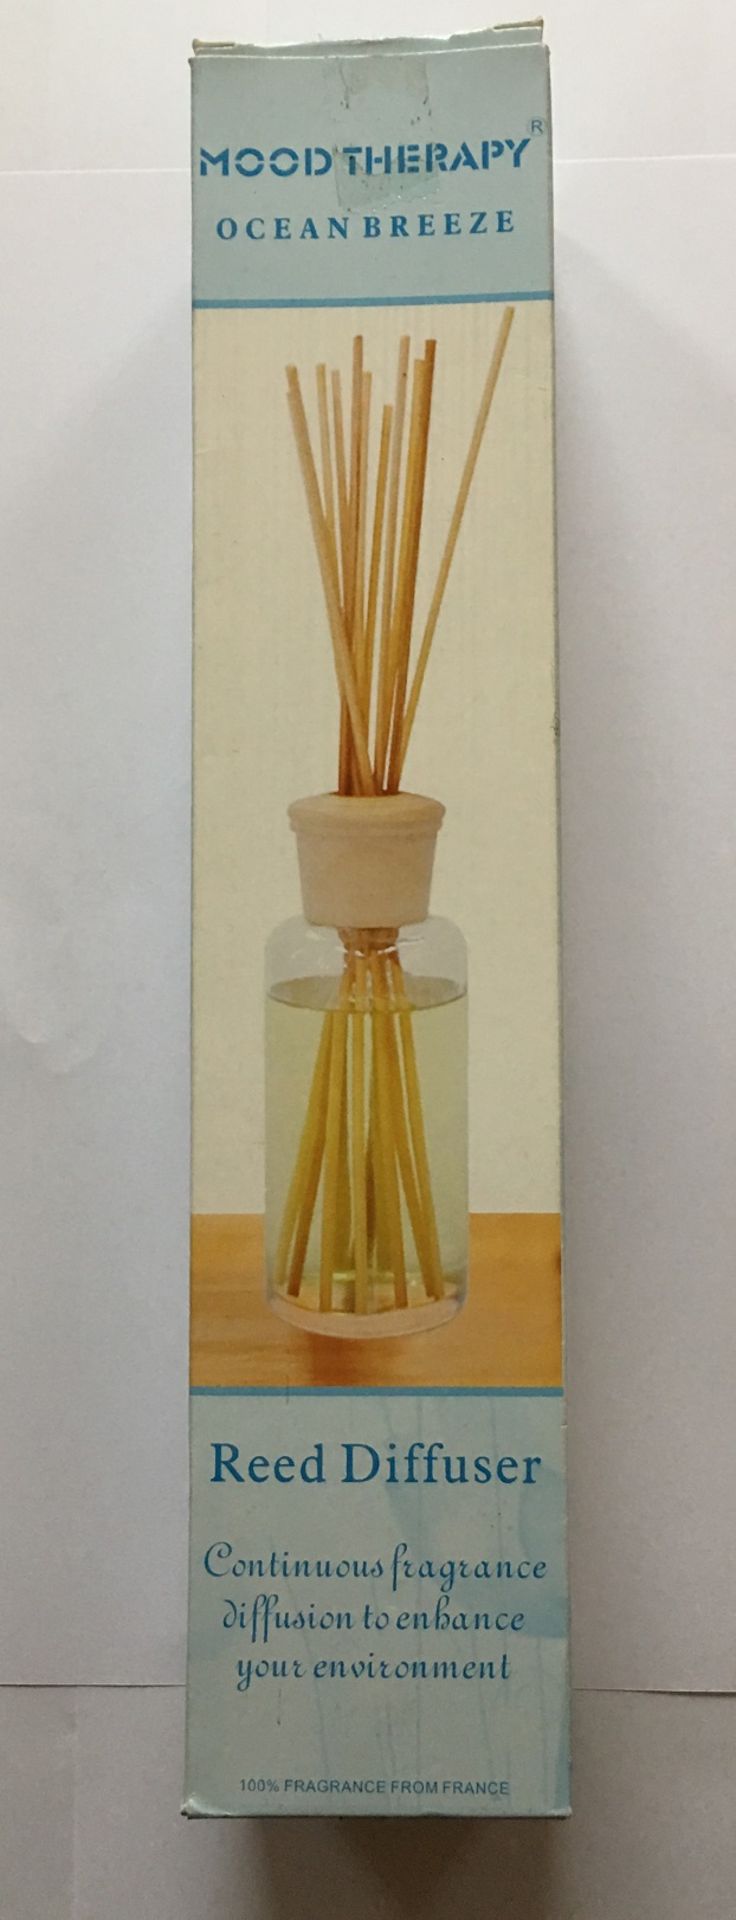 48 x Mood Therapy Reed Diffuser – assorted Fragrances 200ml each – UK Delivery £20 – NO VAT